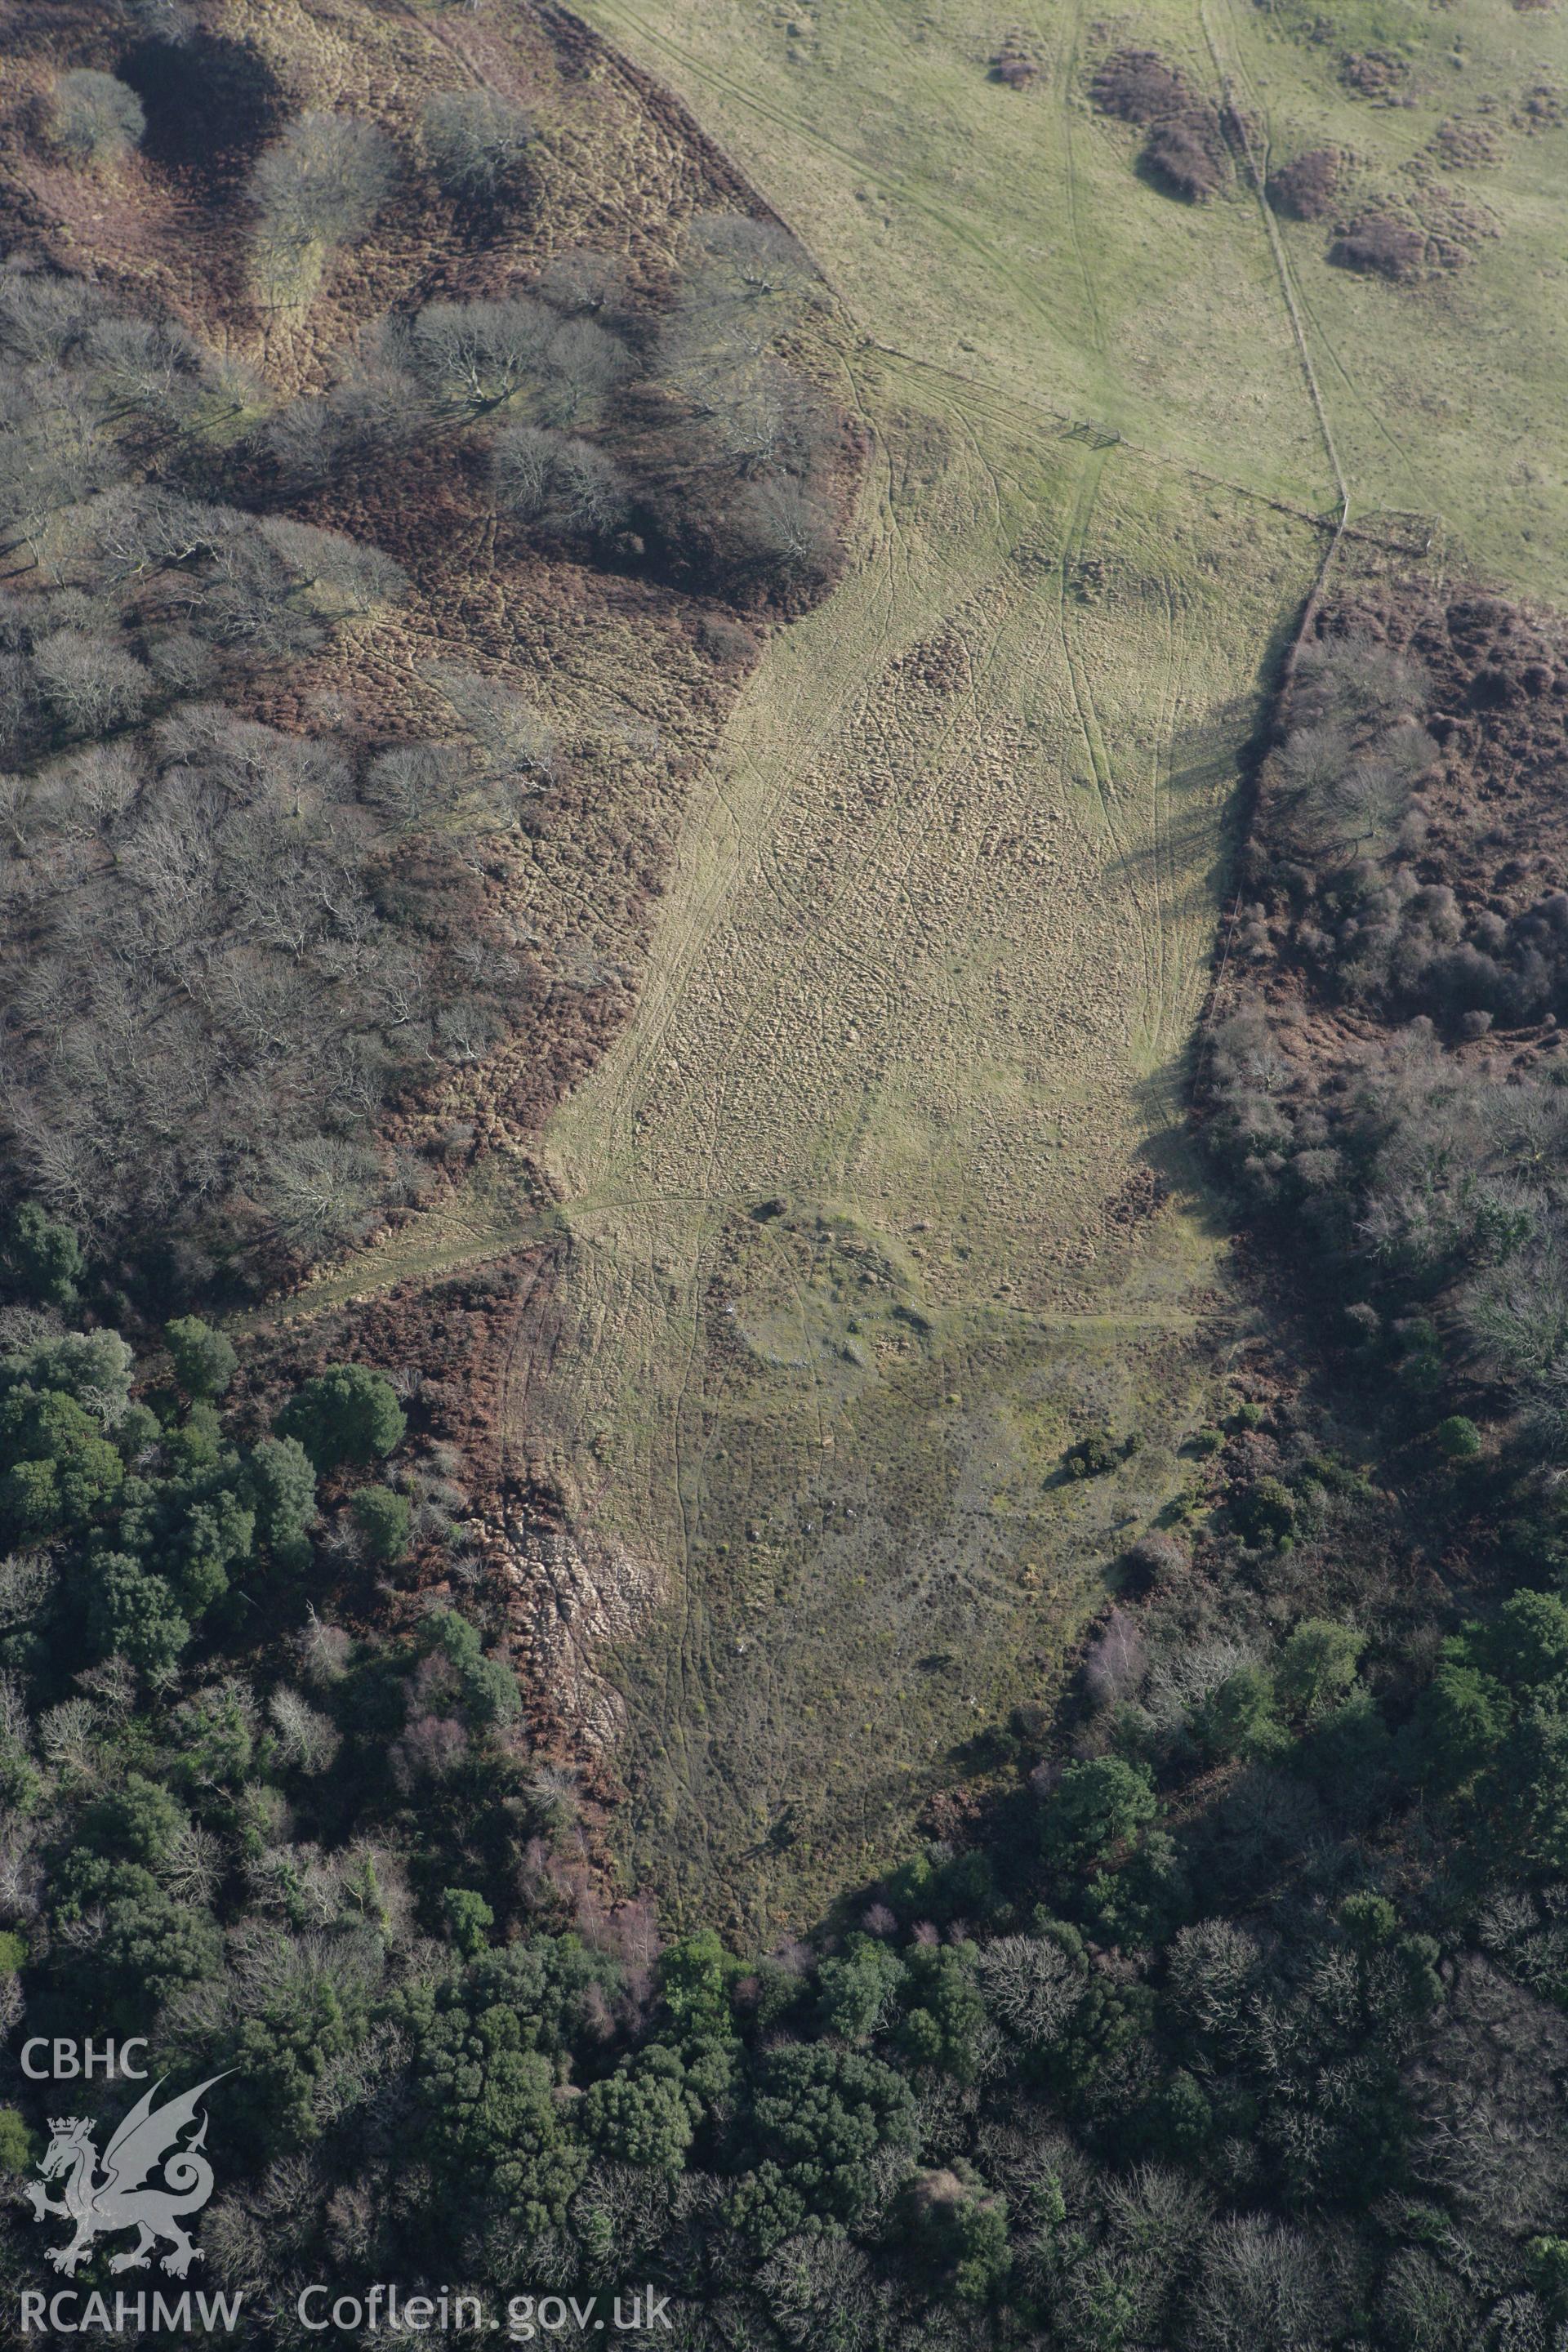 RCAHMW colour oblique aerial photograph of Stackpole Warren 'Ancient Village'. Taken on 28 January 2009 by Toby Driver